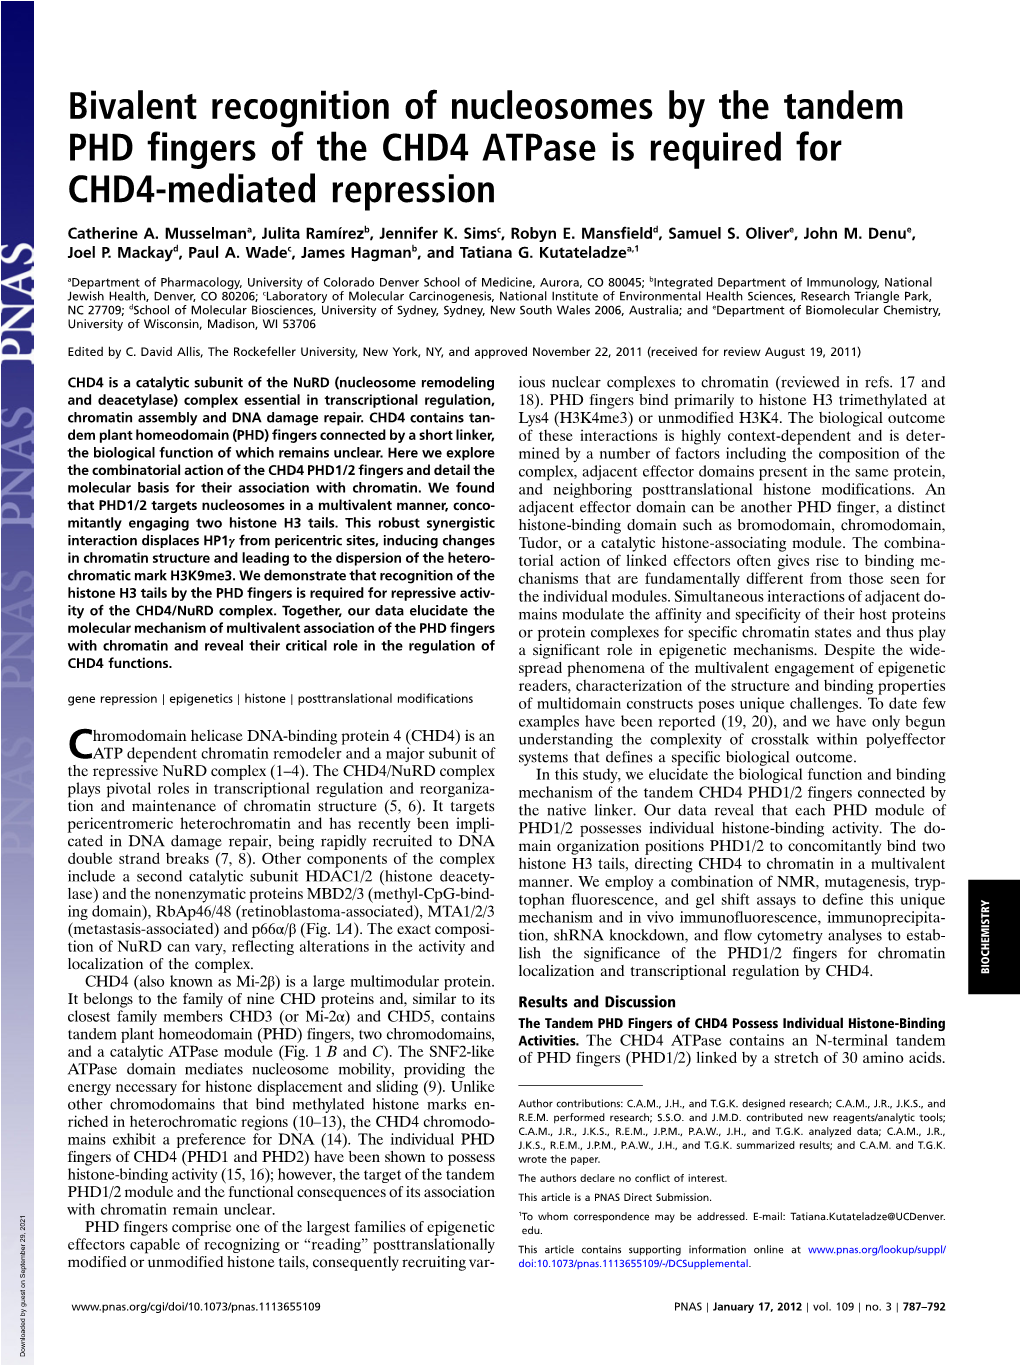 Bivalent Recognition of Nucleosomes by the Tandem PHD Fingers of the CHD4 Atpase Is Required for CHD4-Mediated Repression